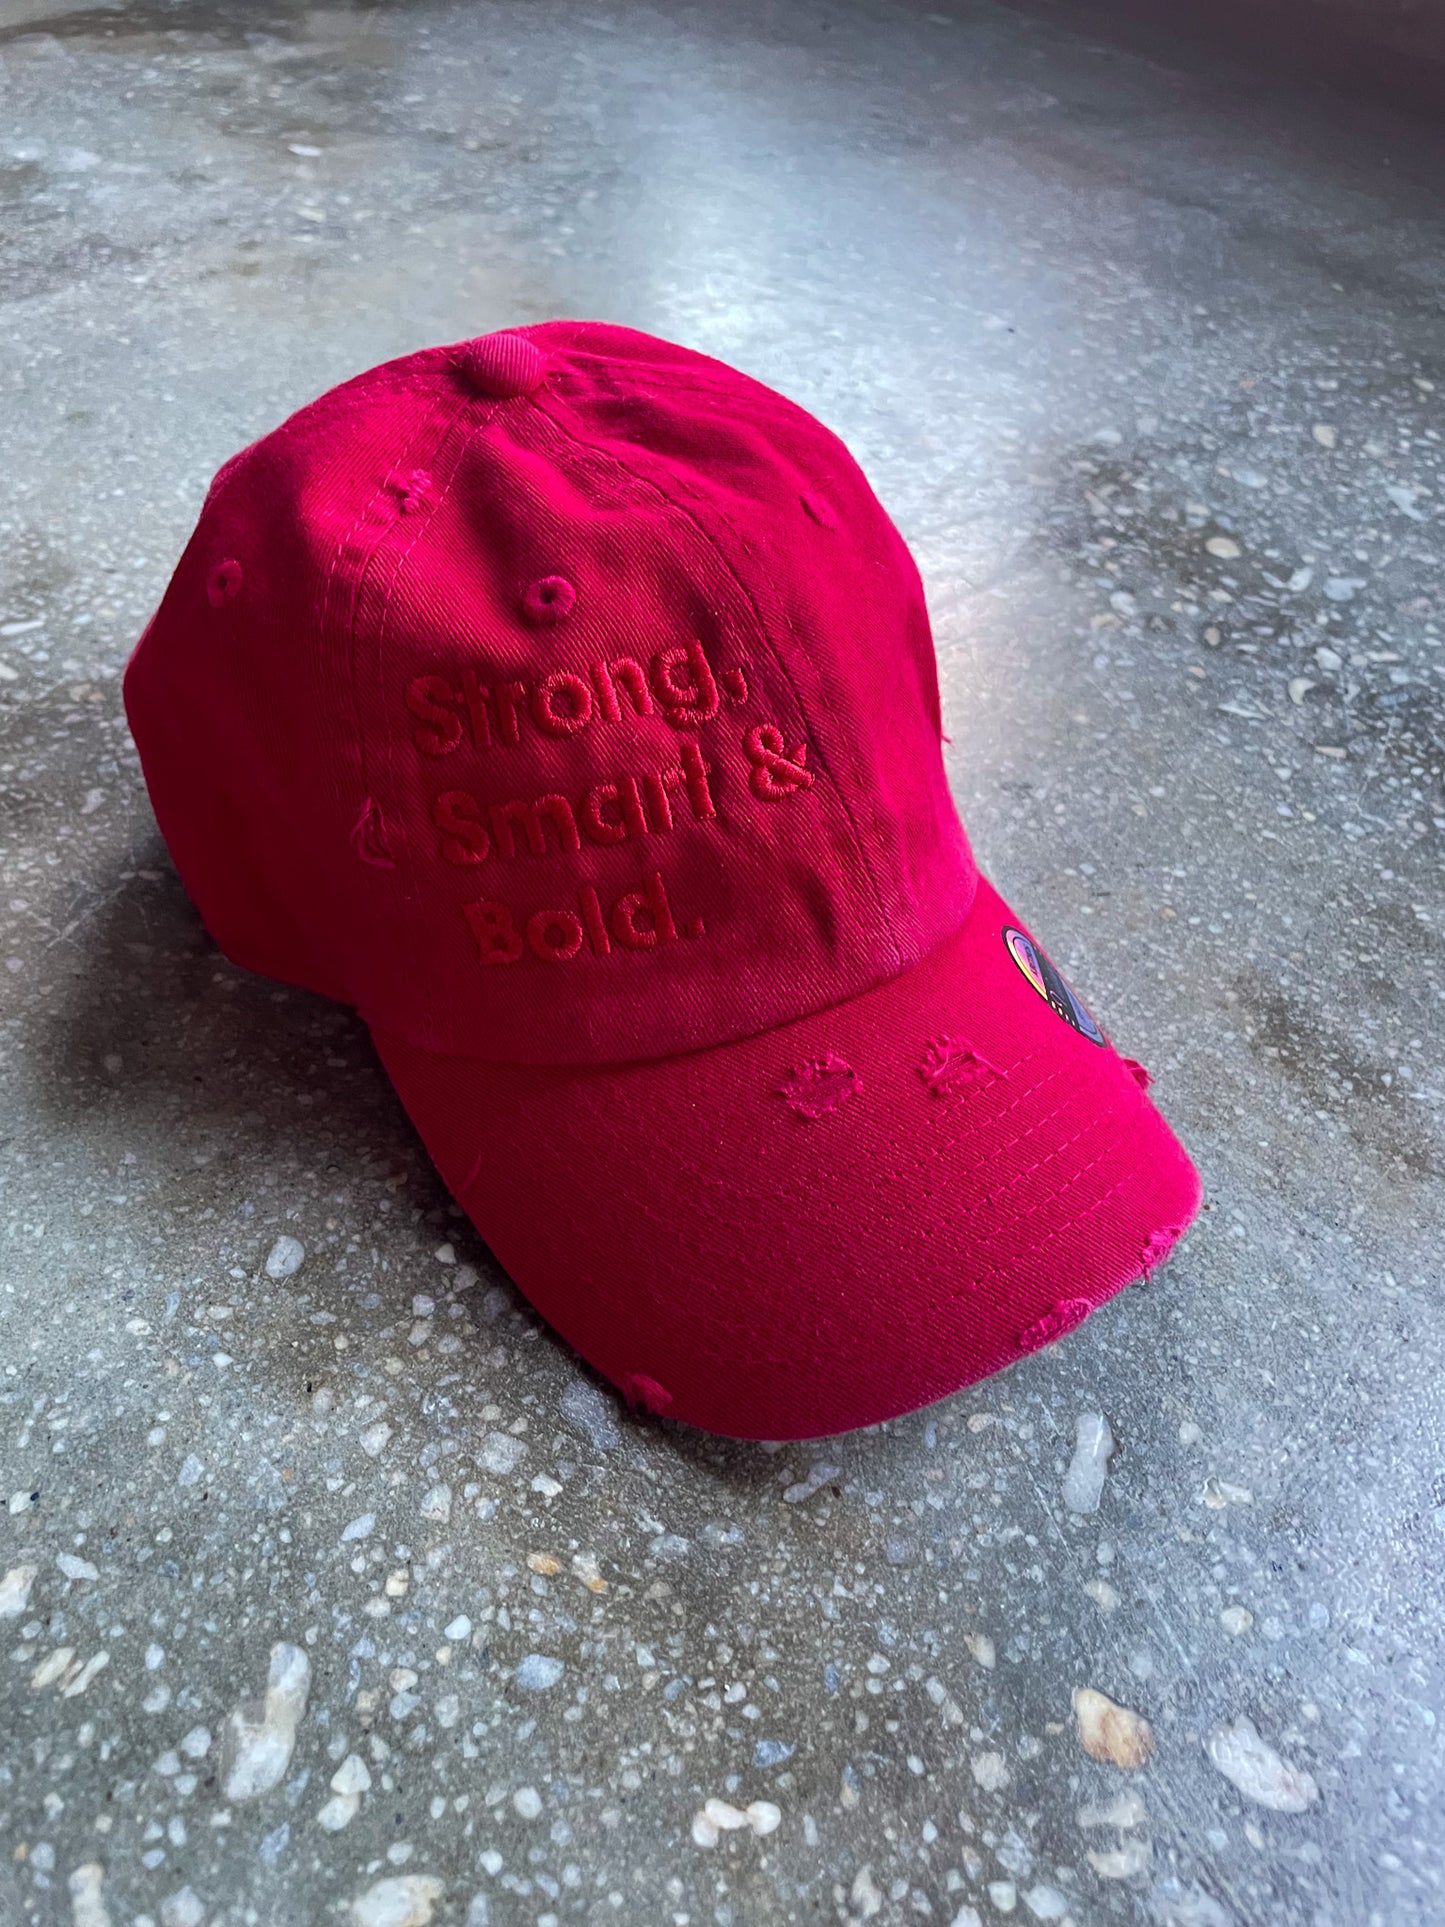 Strong, Smart & Bold Kids Hat (Distressed)